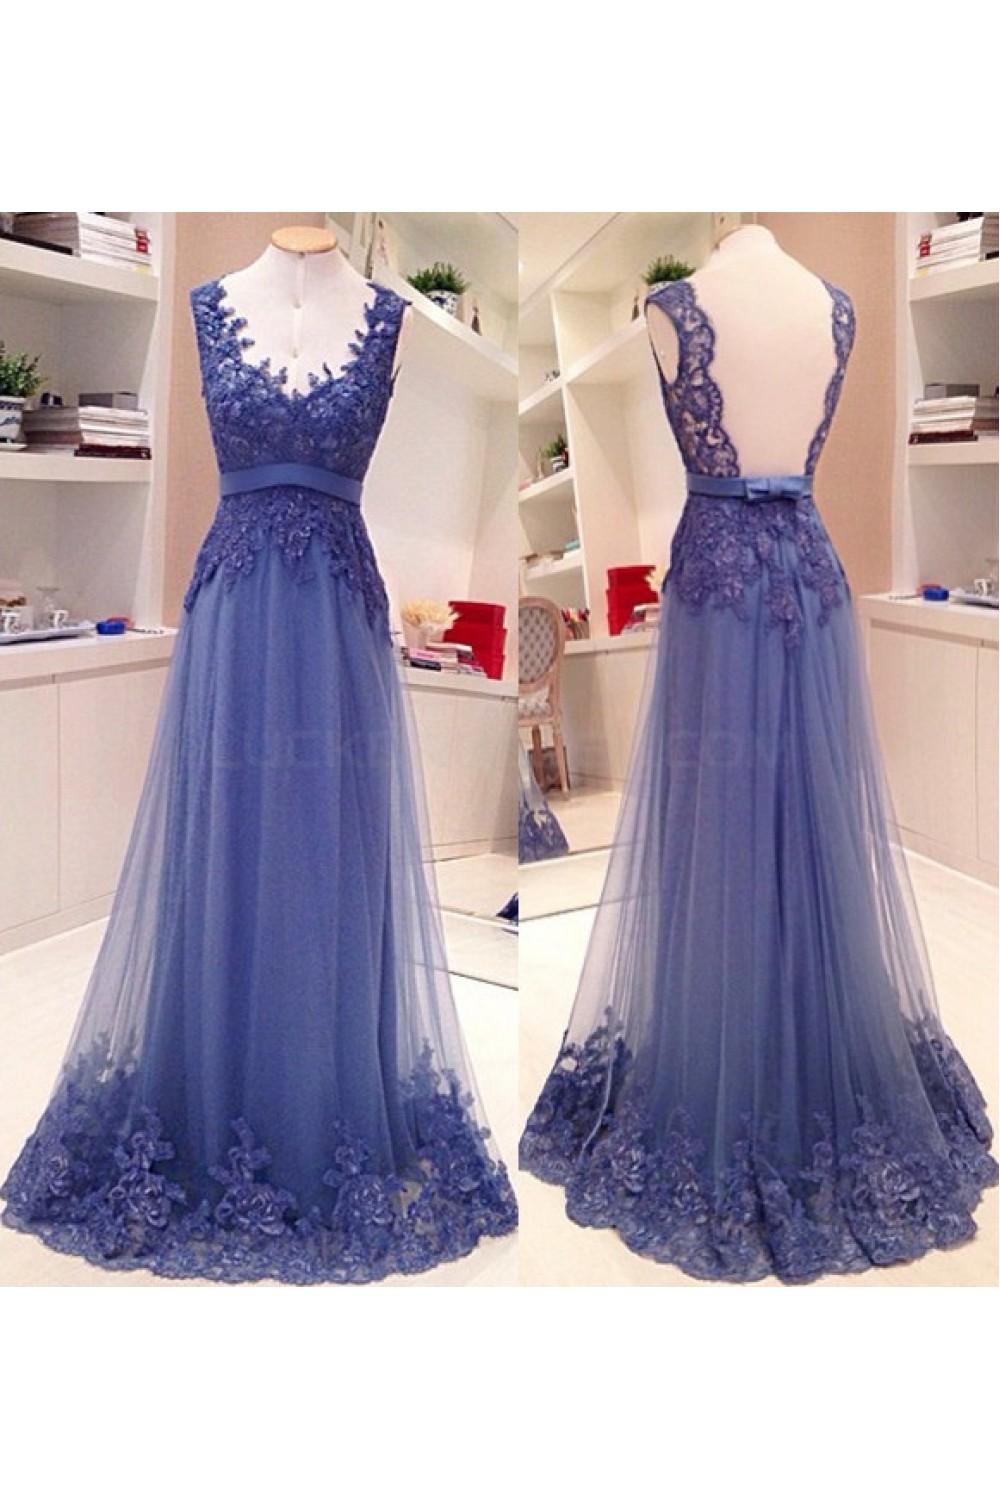 Long Blue Lace Prom Dresses Evening Gowns 3020734